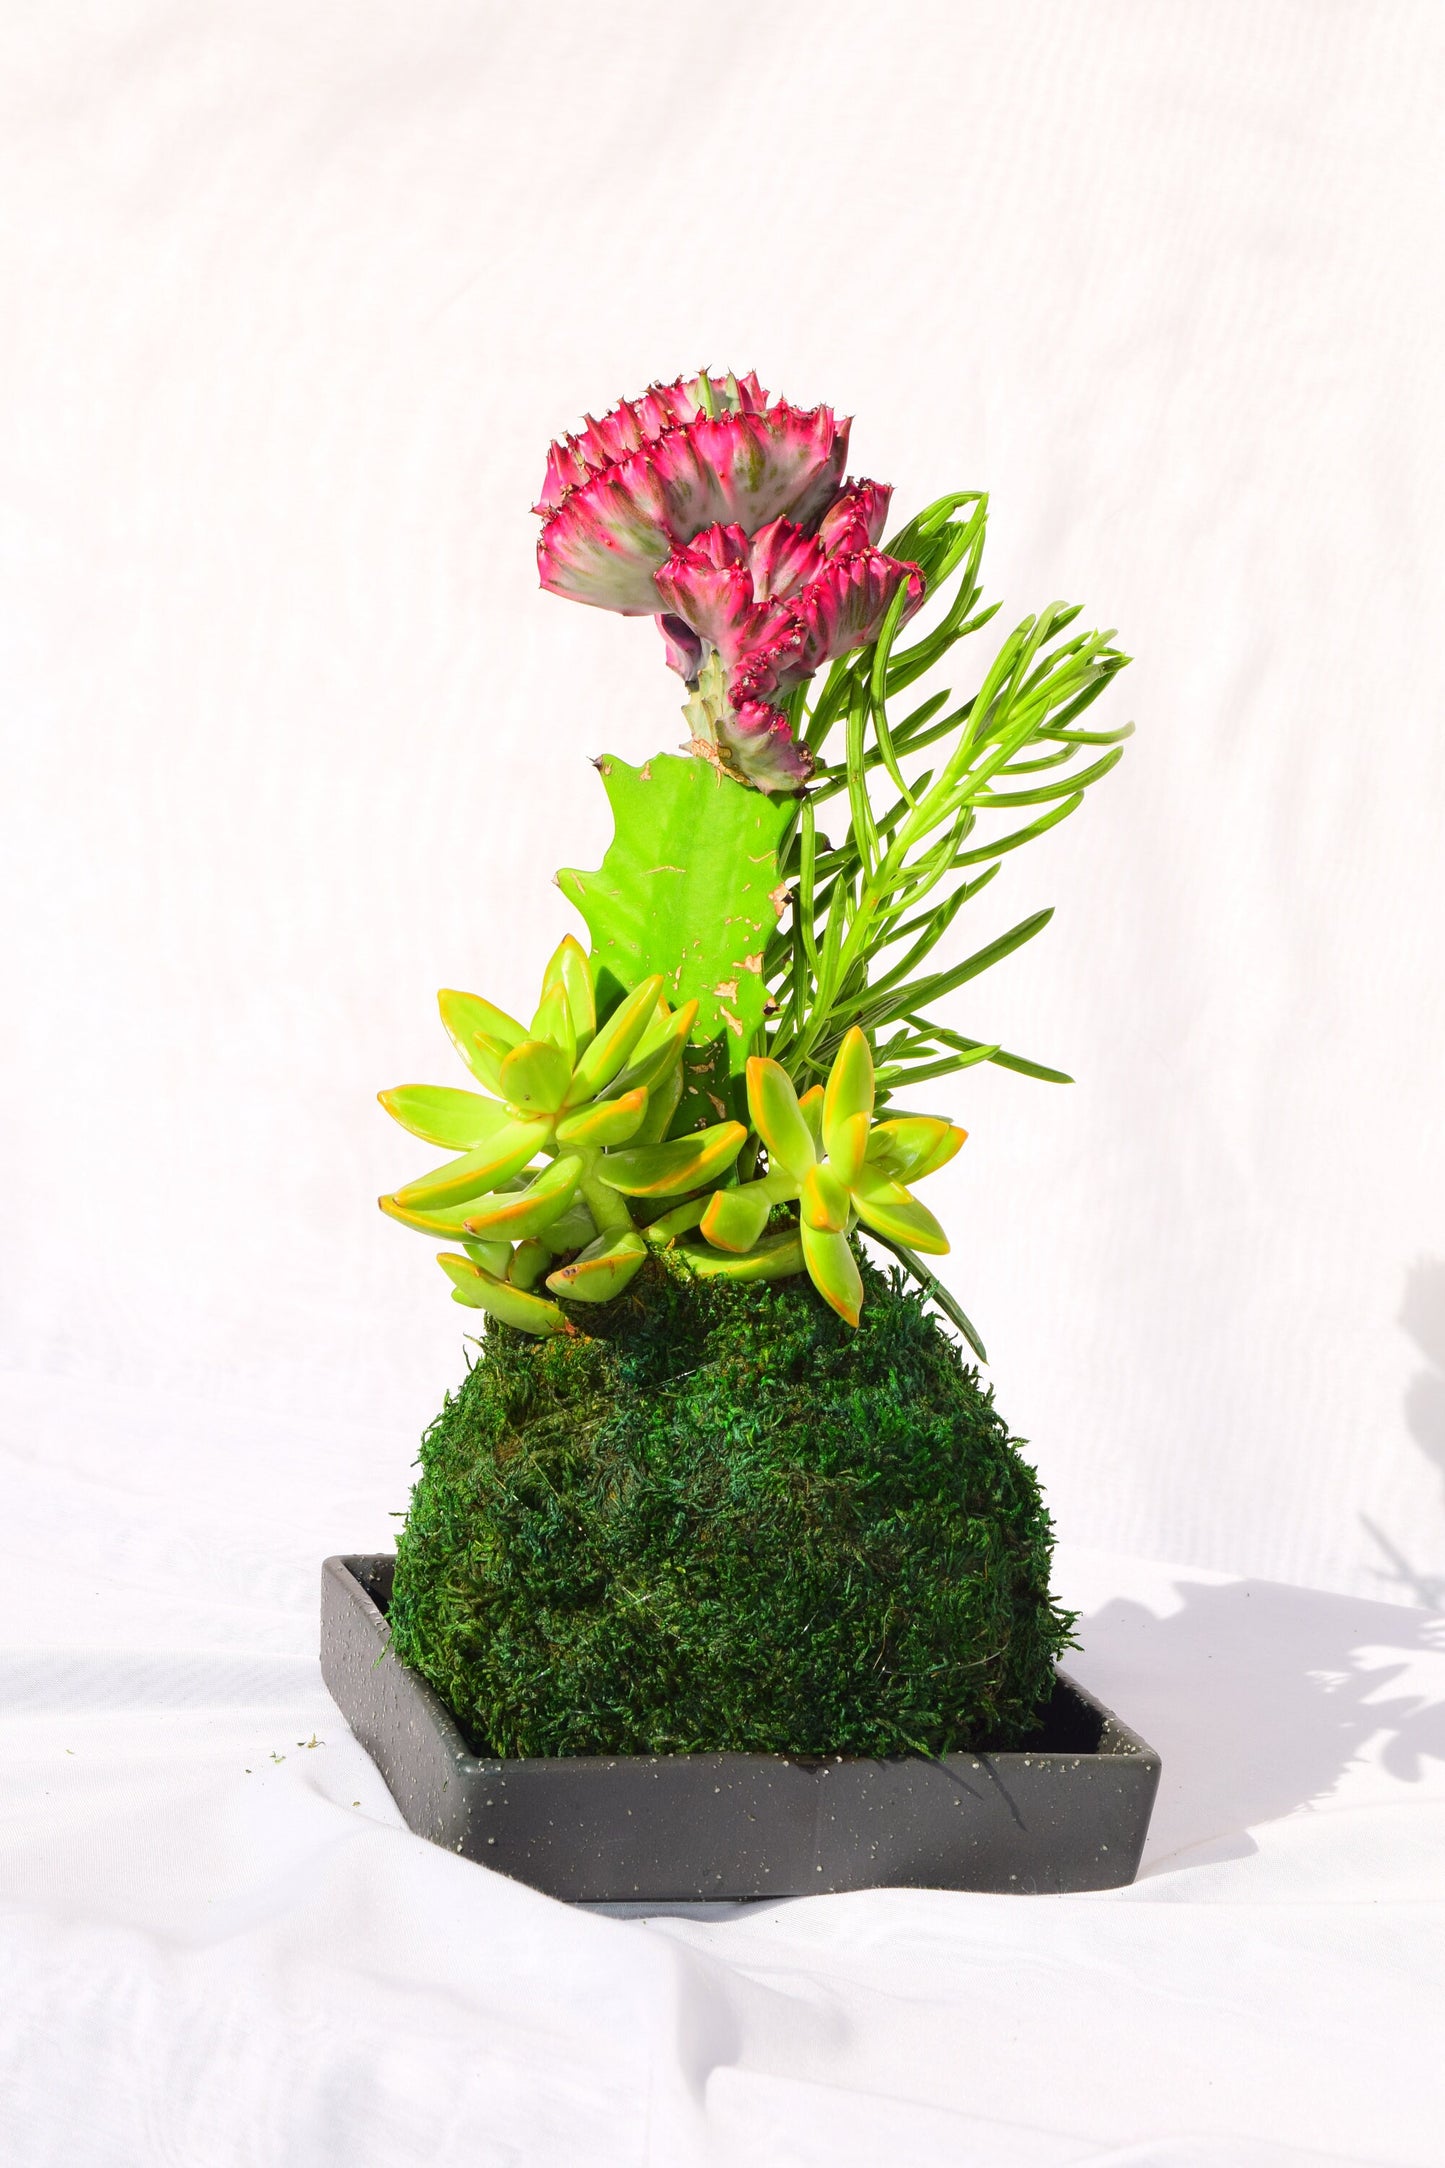 Coral Cactus with succulent combo Kokedama - Japanese Living Art - Moss ball